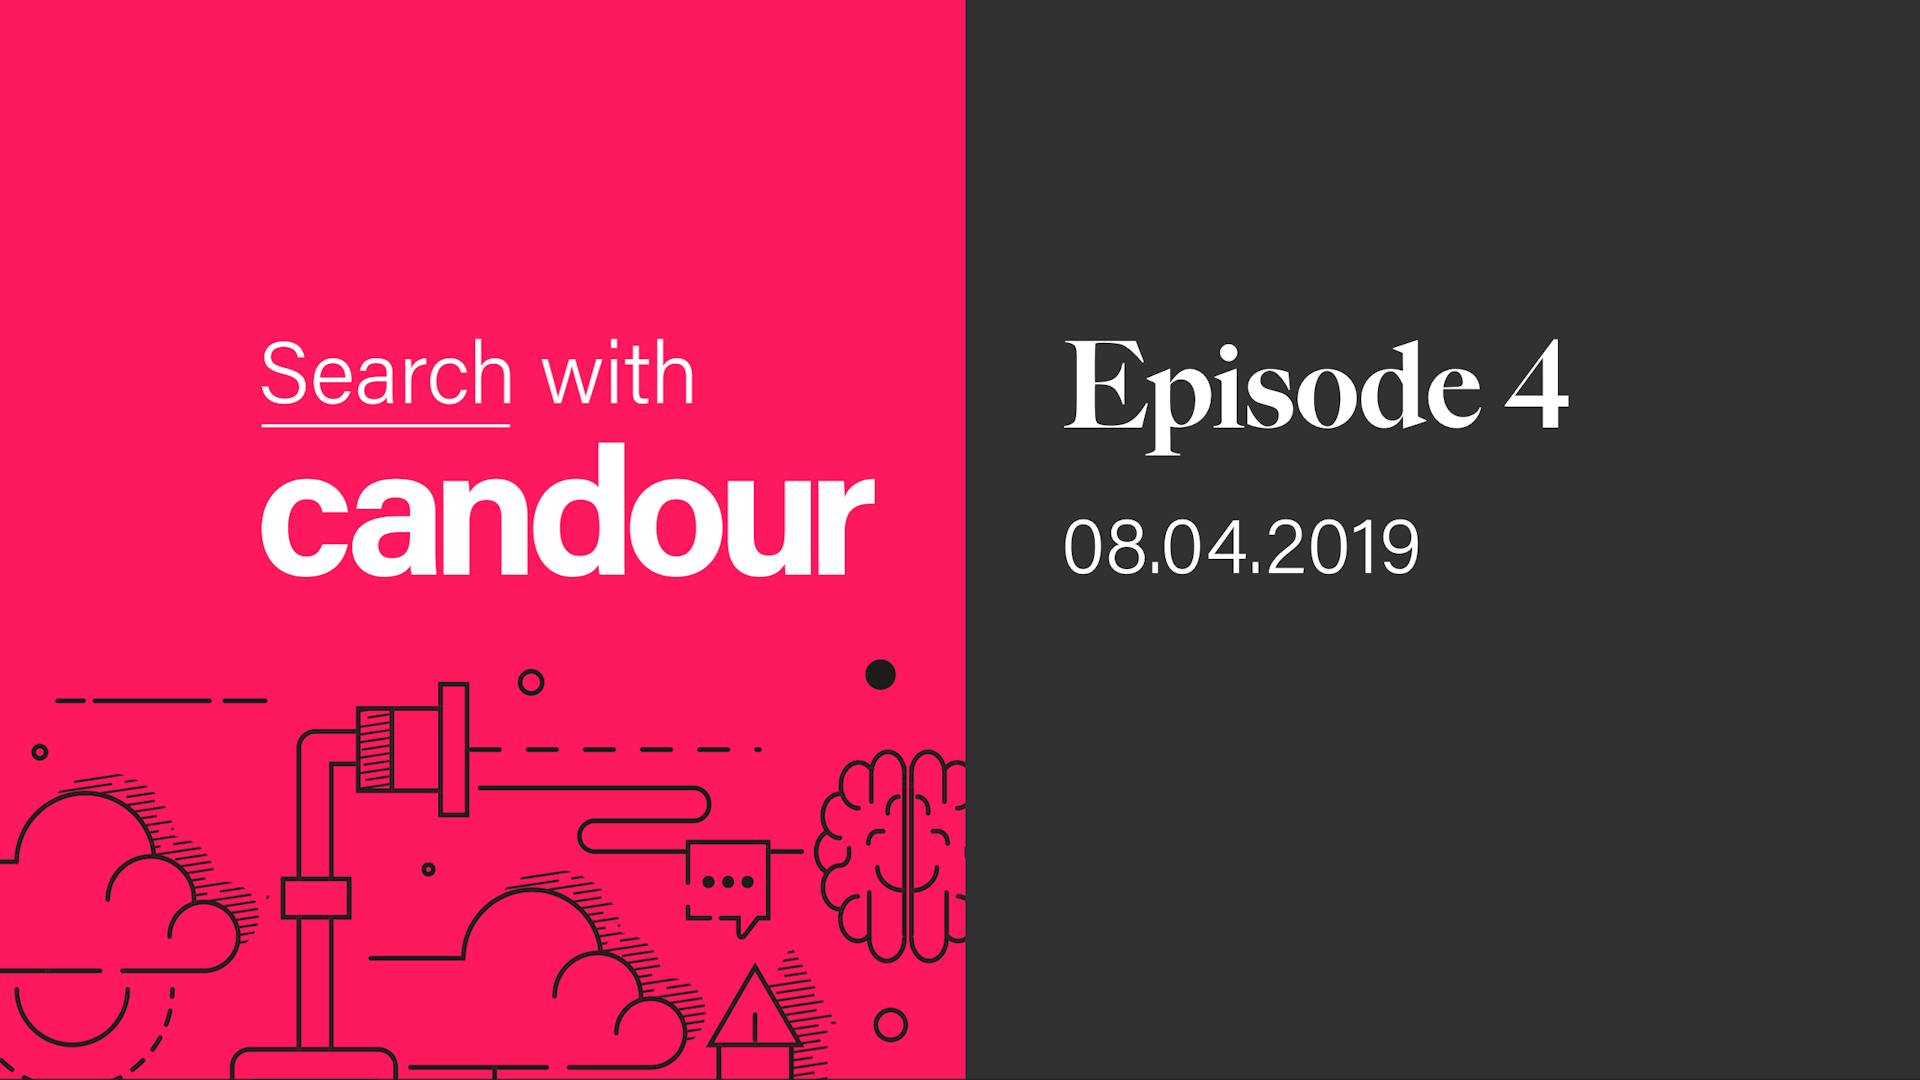 Search with Candour podcast - Episode 4